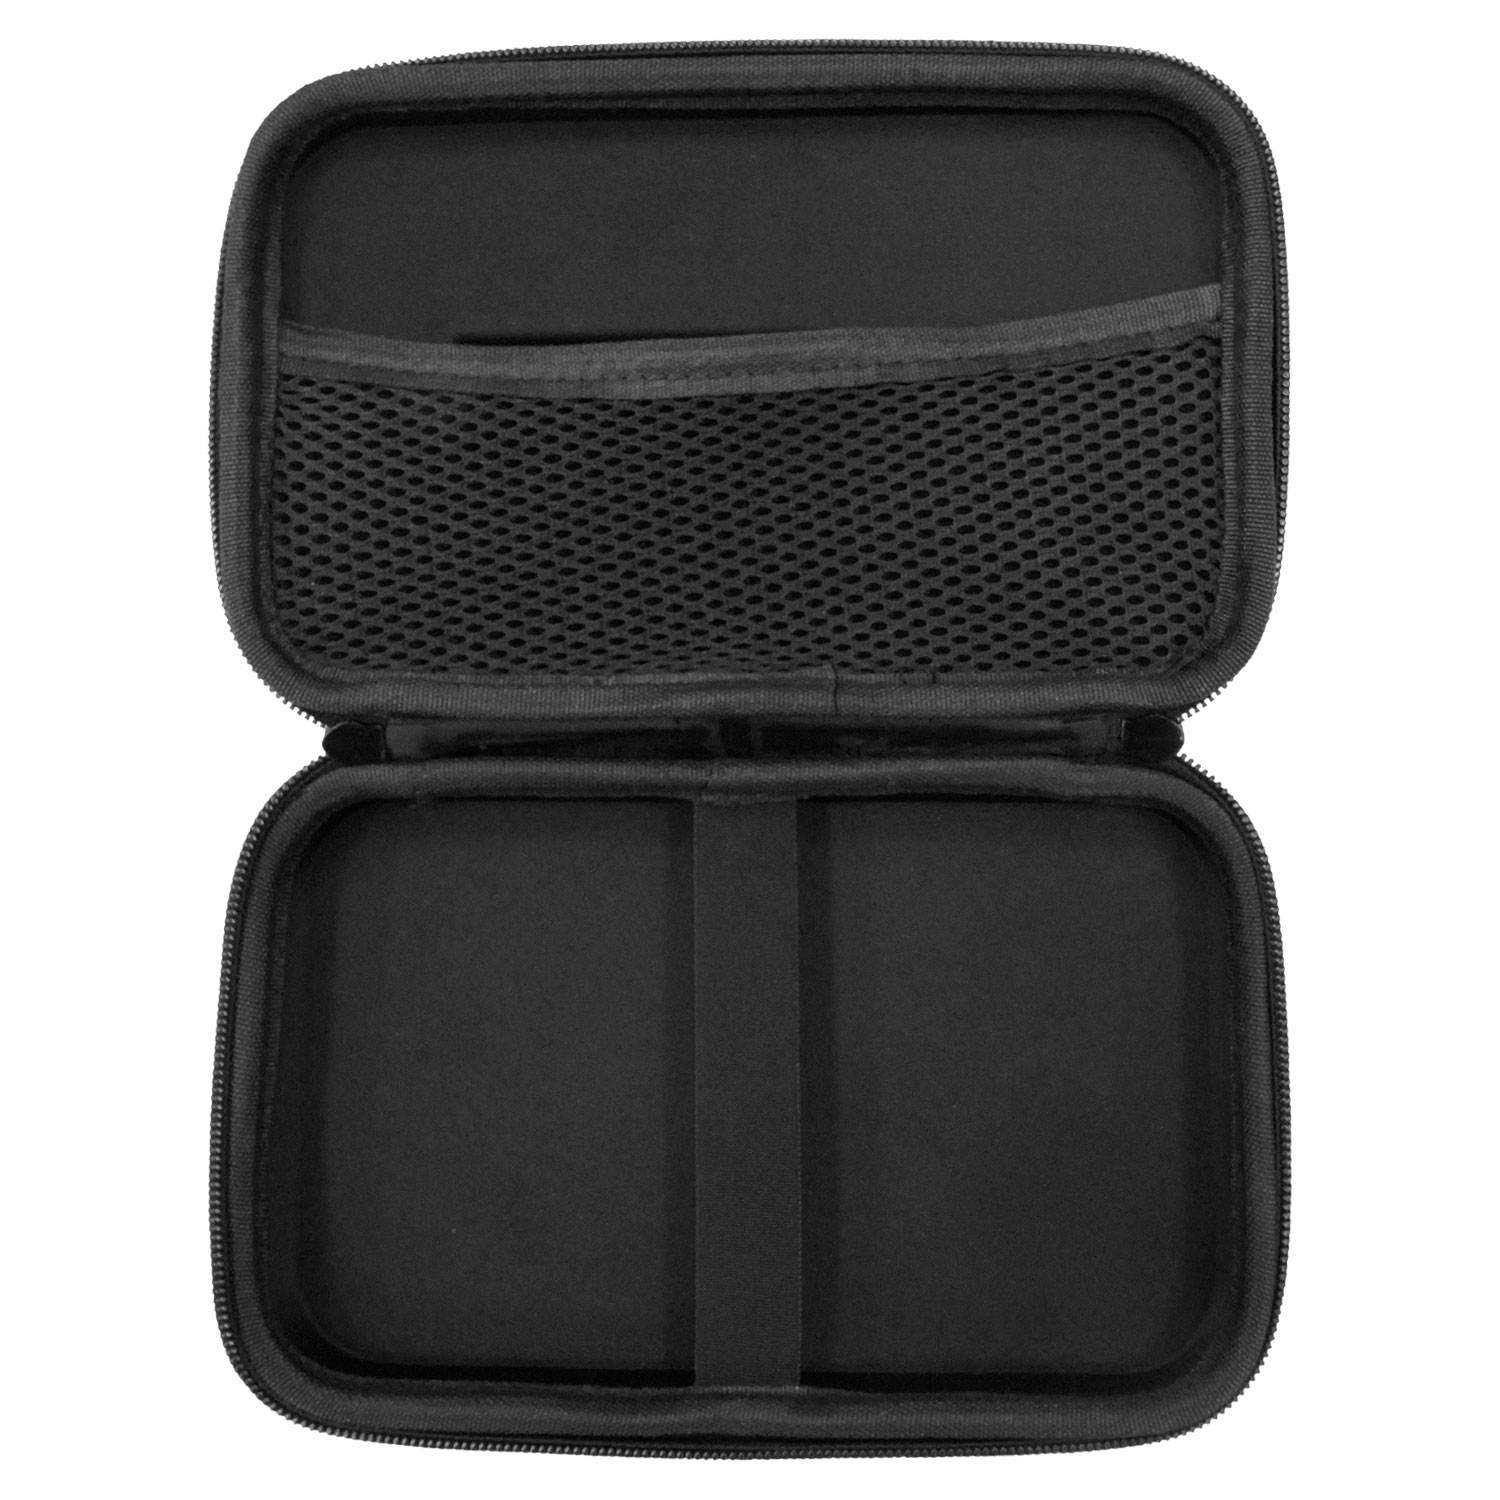 Photos - GPS Accessory Deco Gear Hard EVA Case with Zipper for Tablets and GPS - 7 Inch 7CASE 